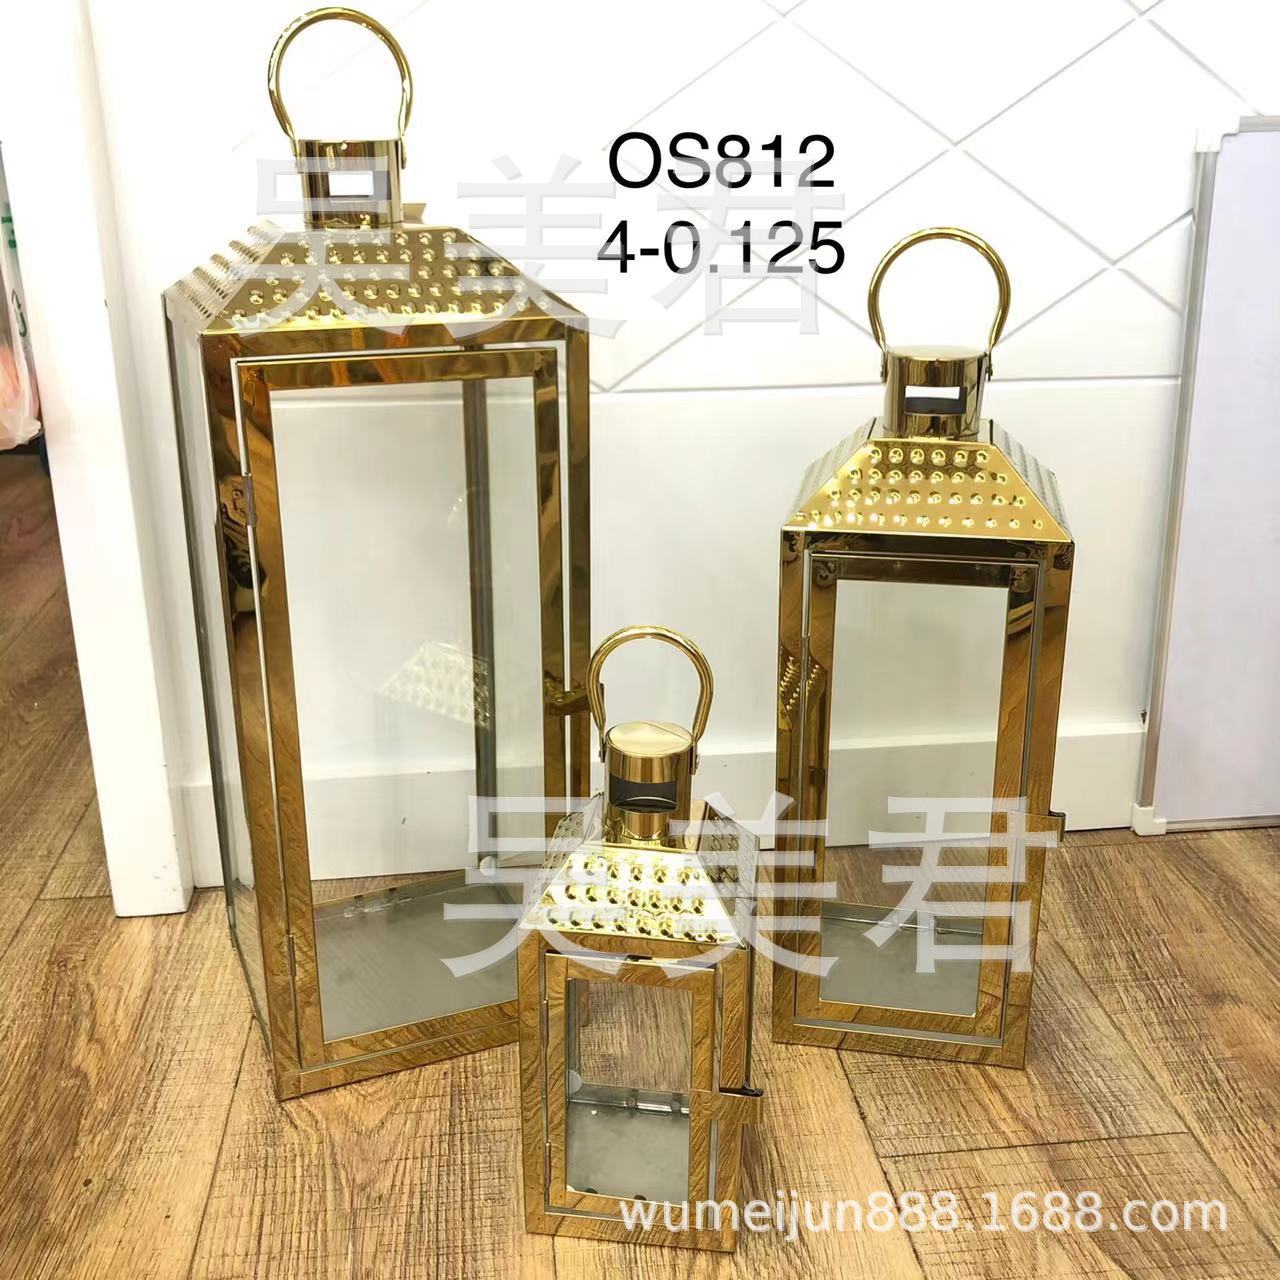 European-Style Floor Stainless Steel Windproof Storm Lantern Gold and Silver Color Retro Candlestick Wedding Props Outdoor Simplicity Ornaments